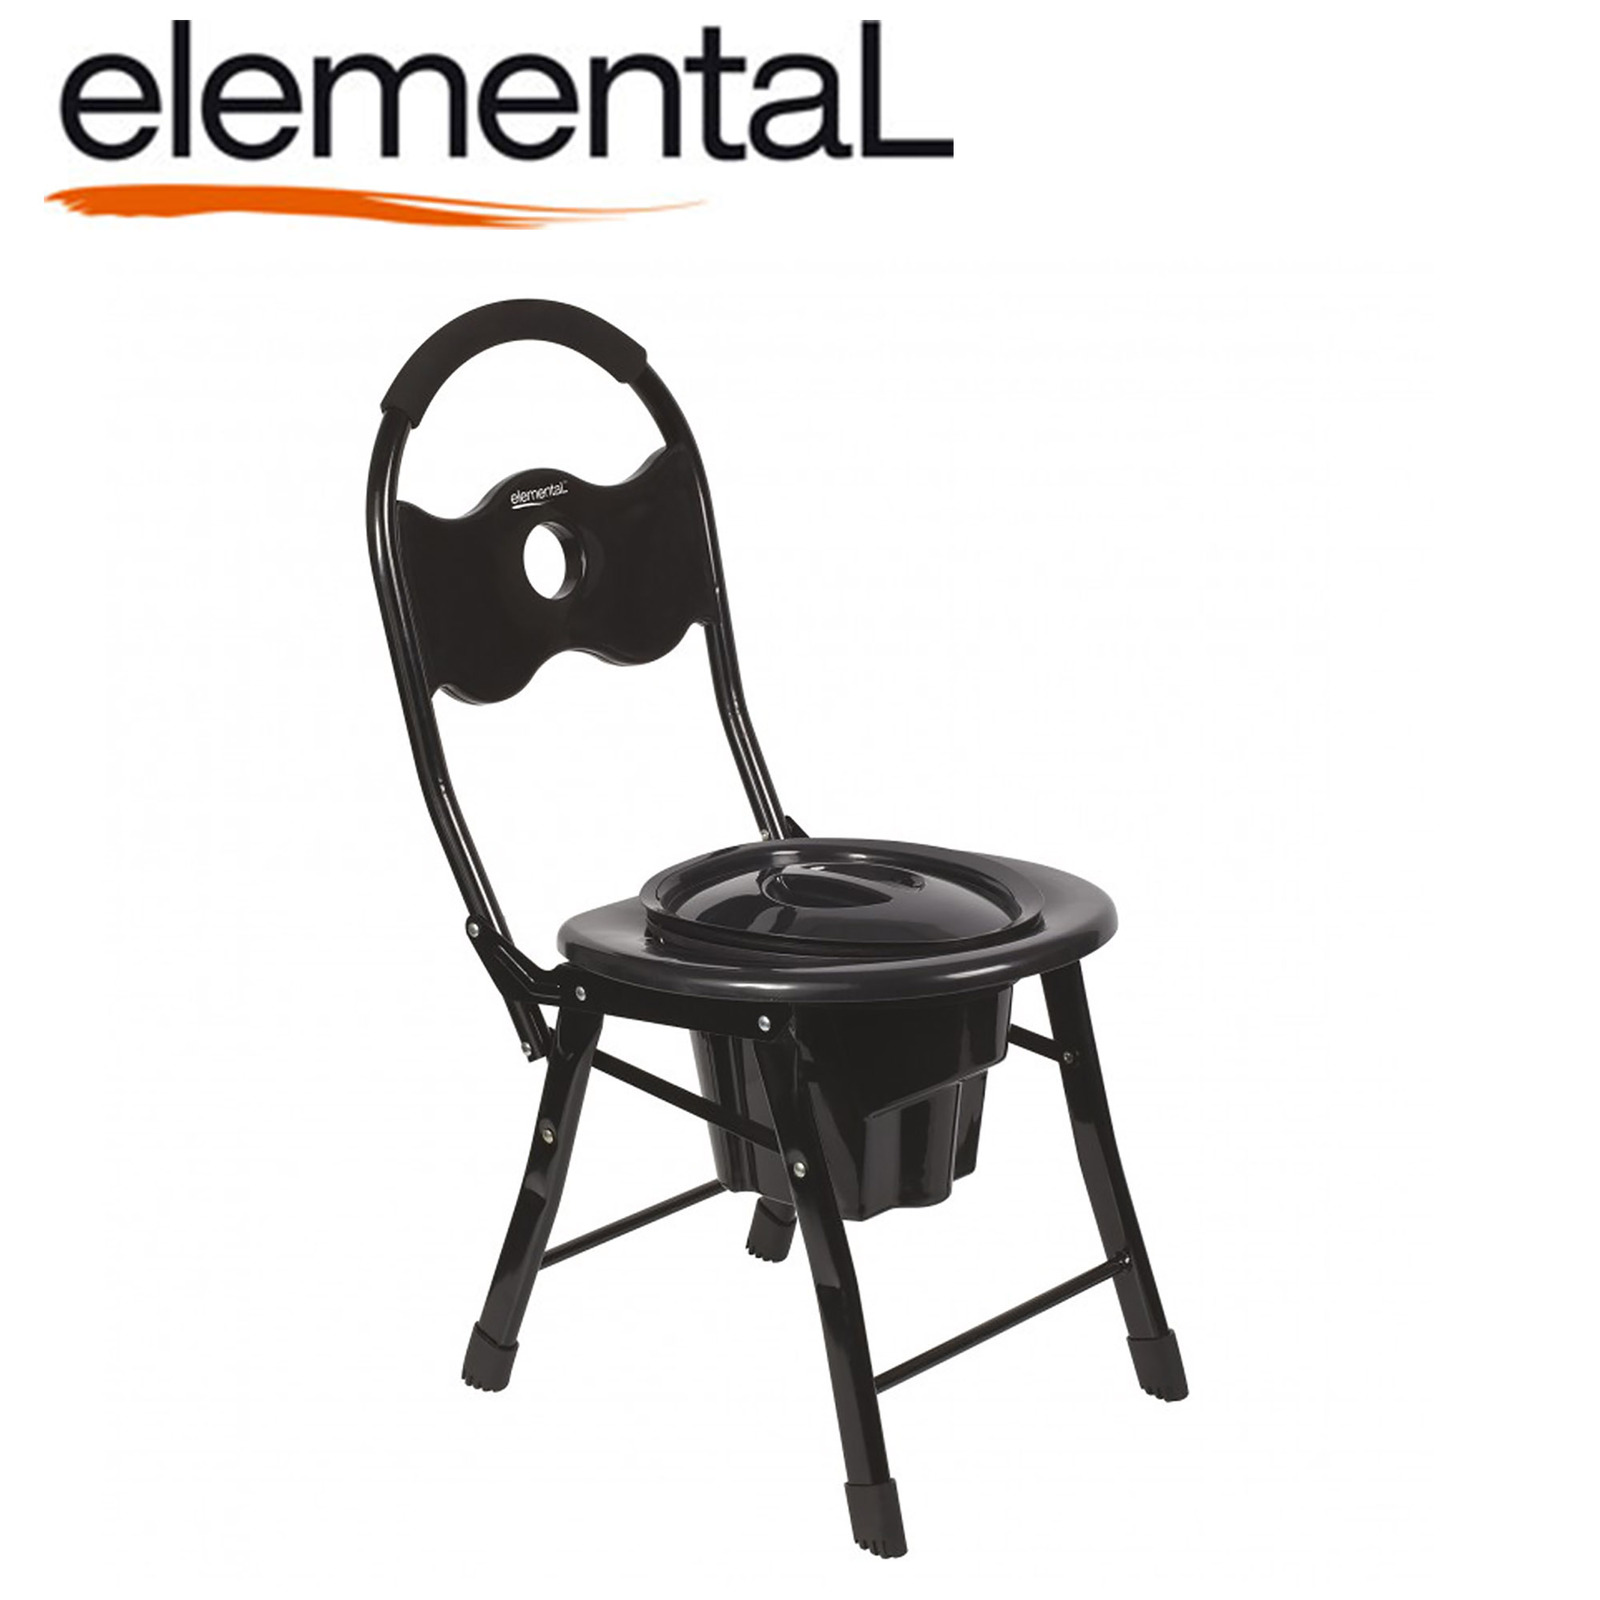 ELEMENTAL COMPACT FOLDING PORTABLE OUTDOOR CAMP CAMPING ...